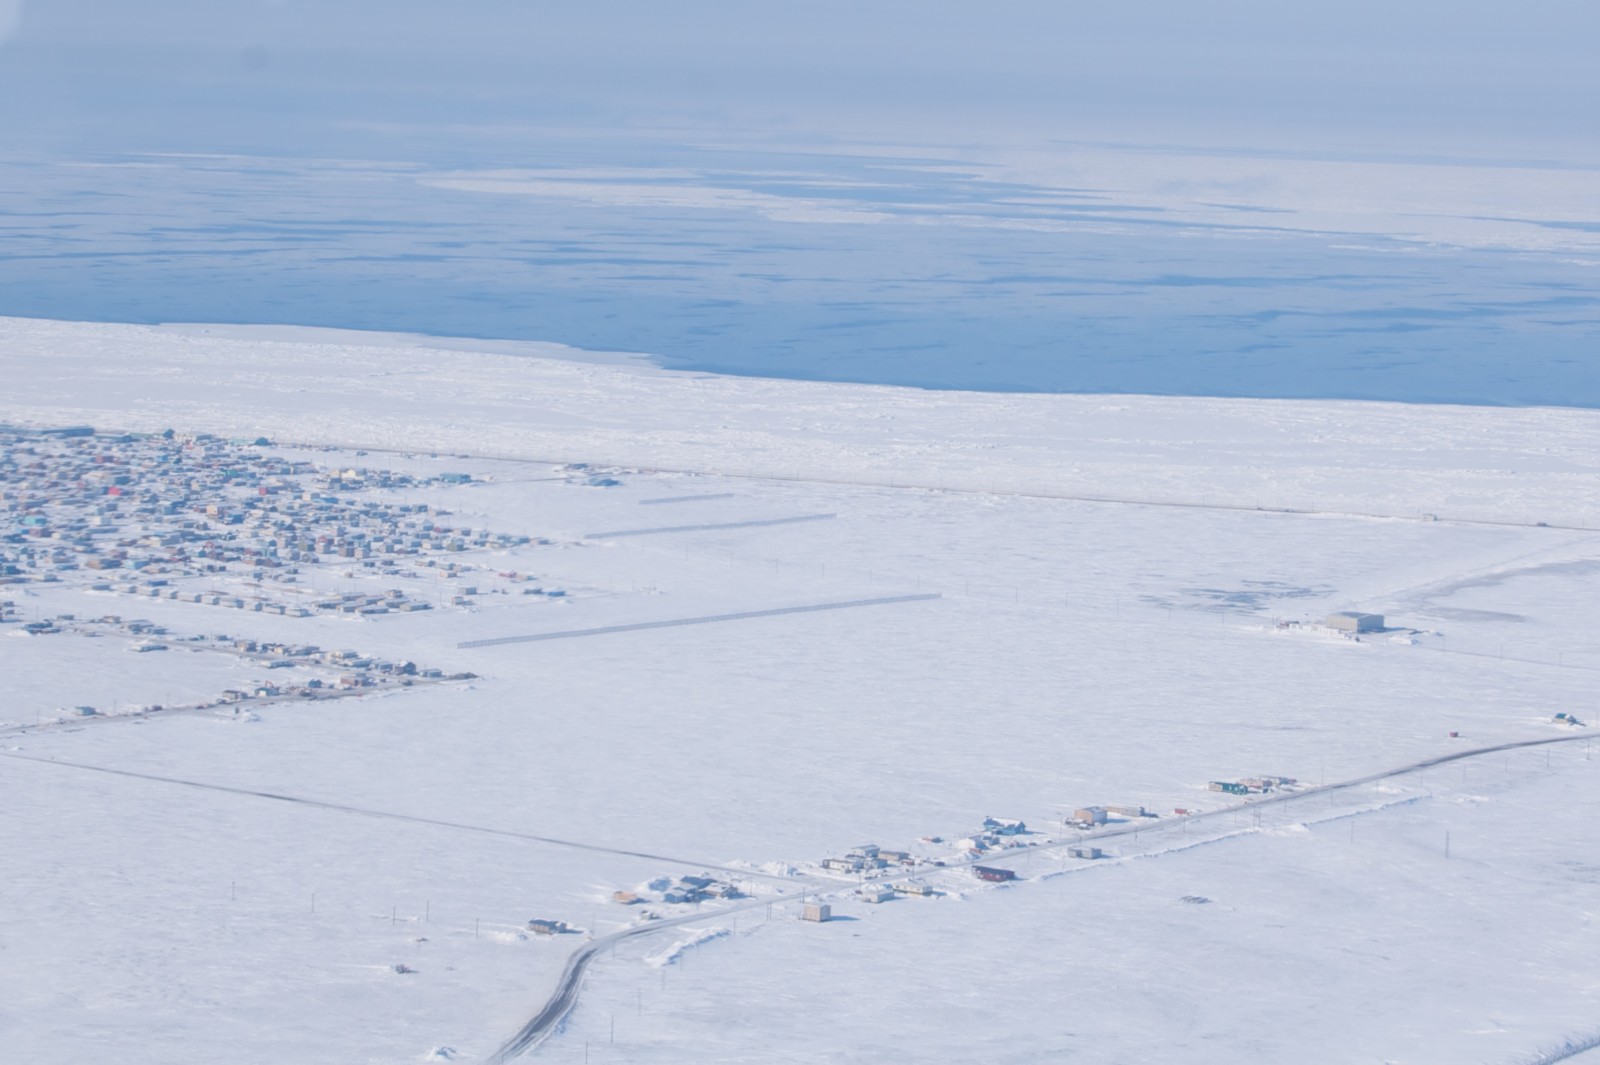 Airborn view on a wide snow landscape with a settlement and airstrip.